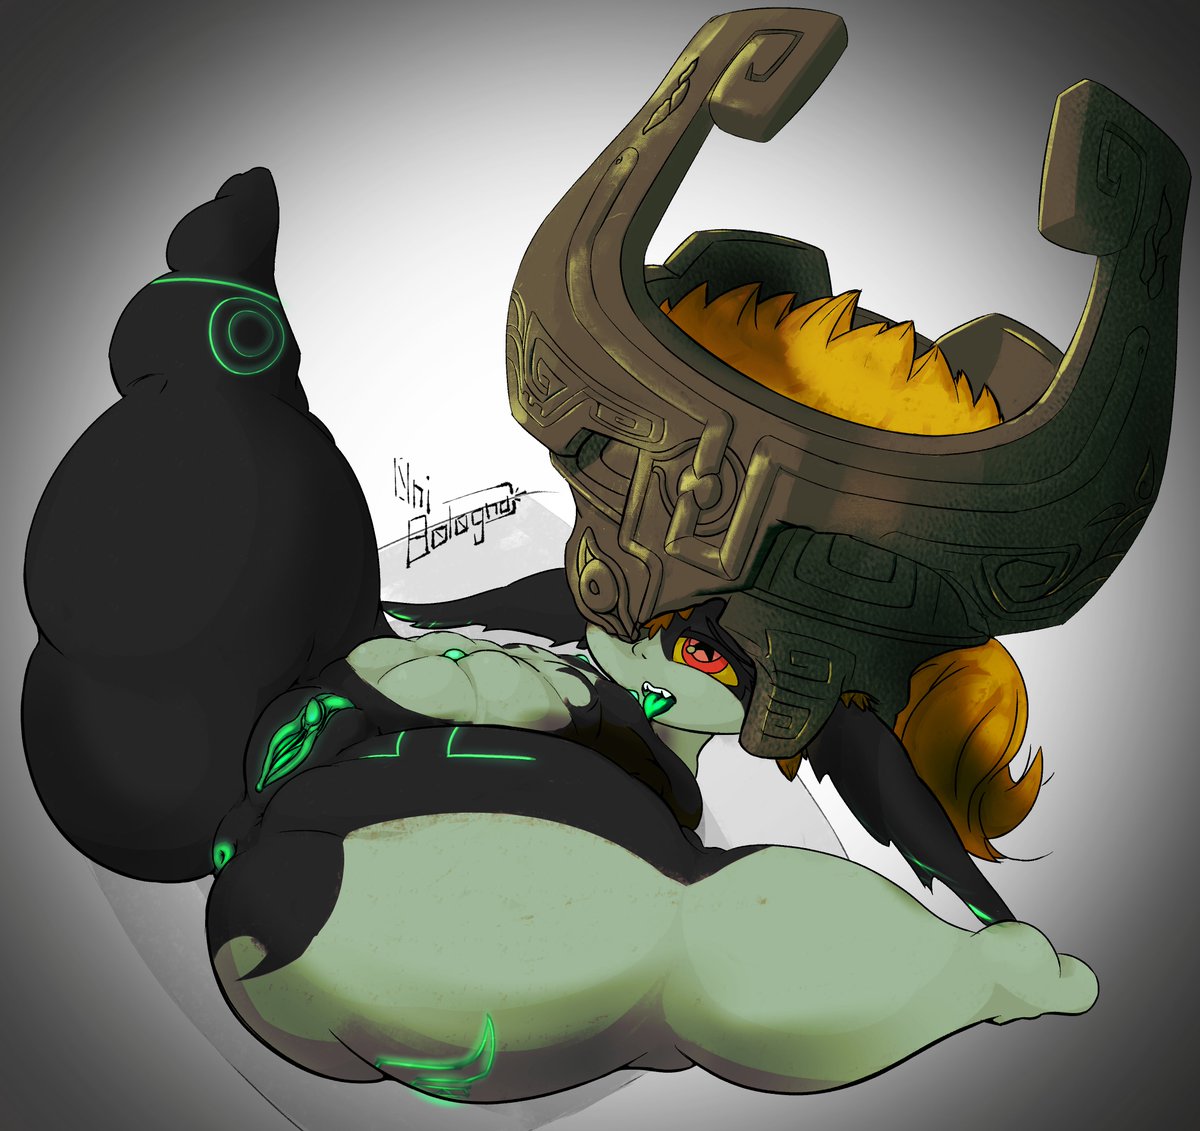 ey yo, its been a bit... have a midna! #shortstack.